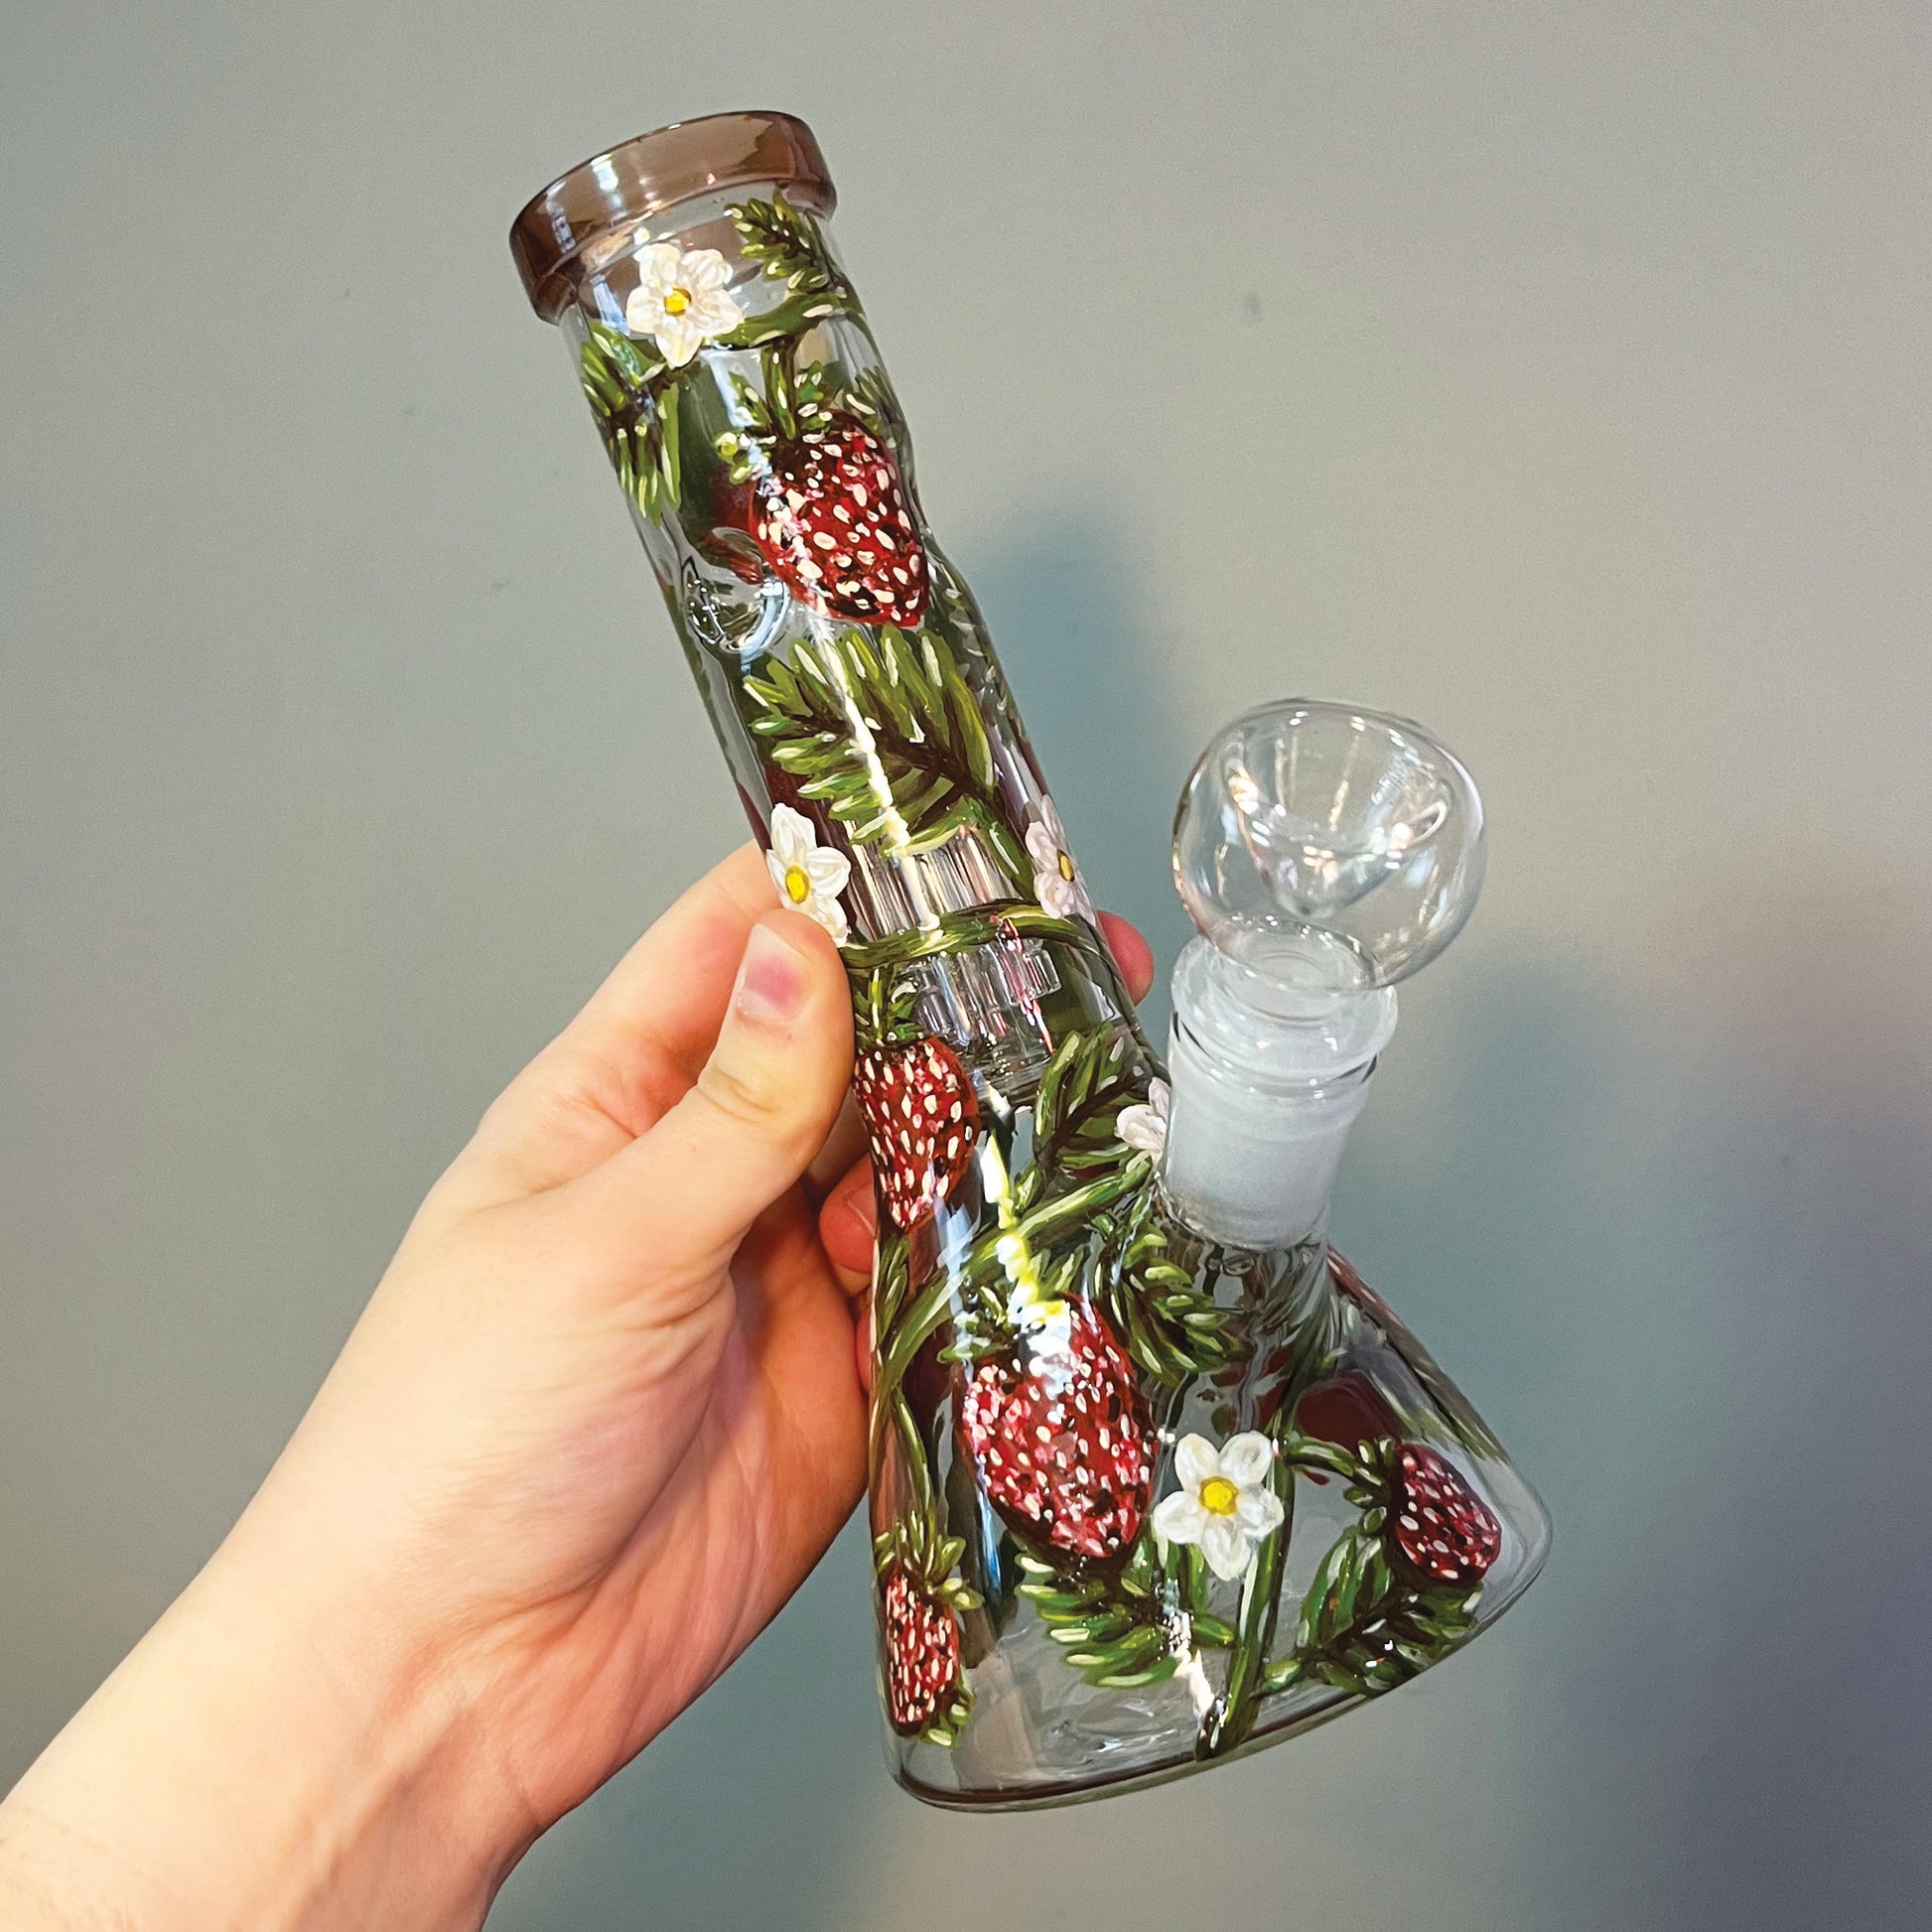 This is the bong being held up by a hand, the same design as before